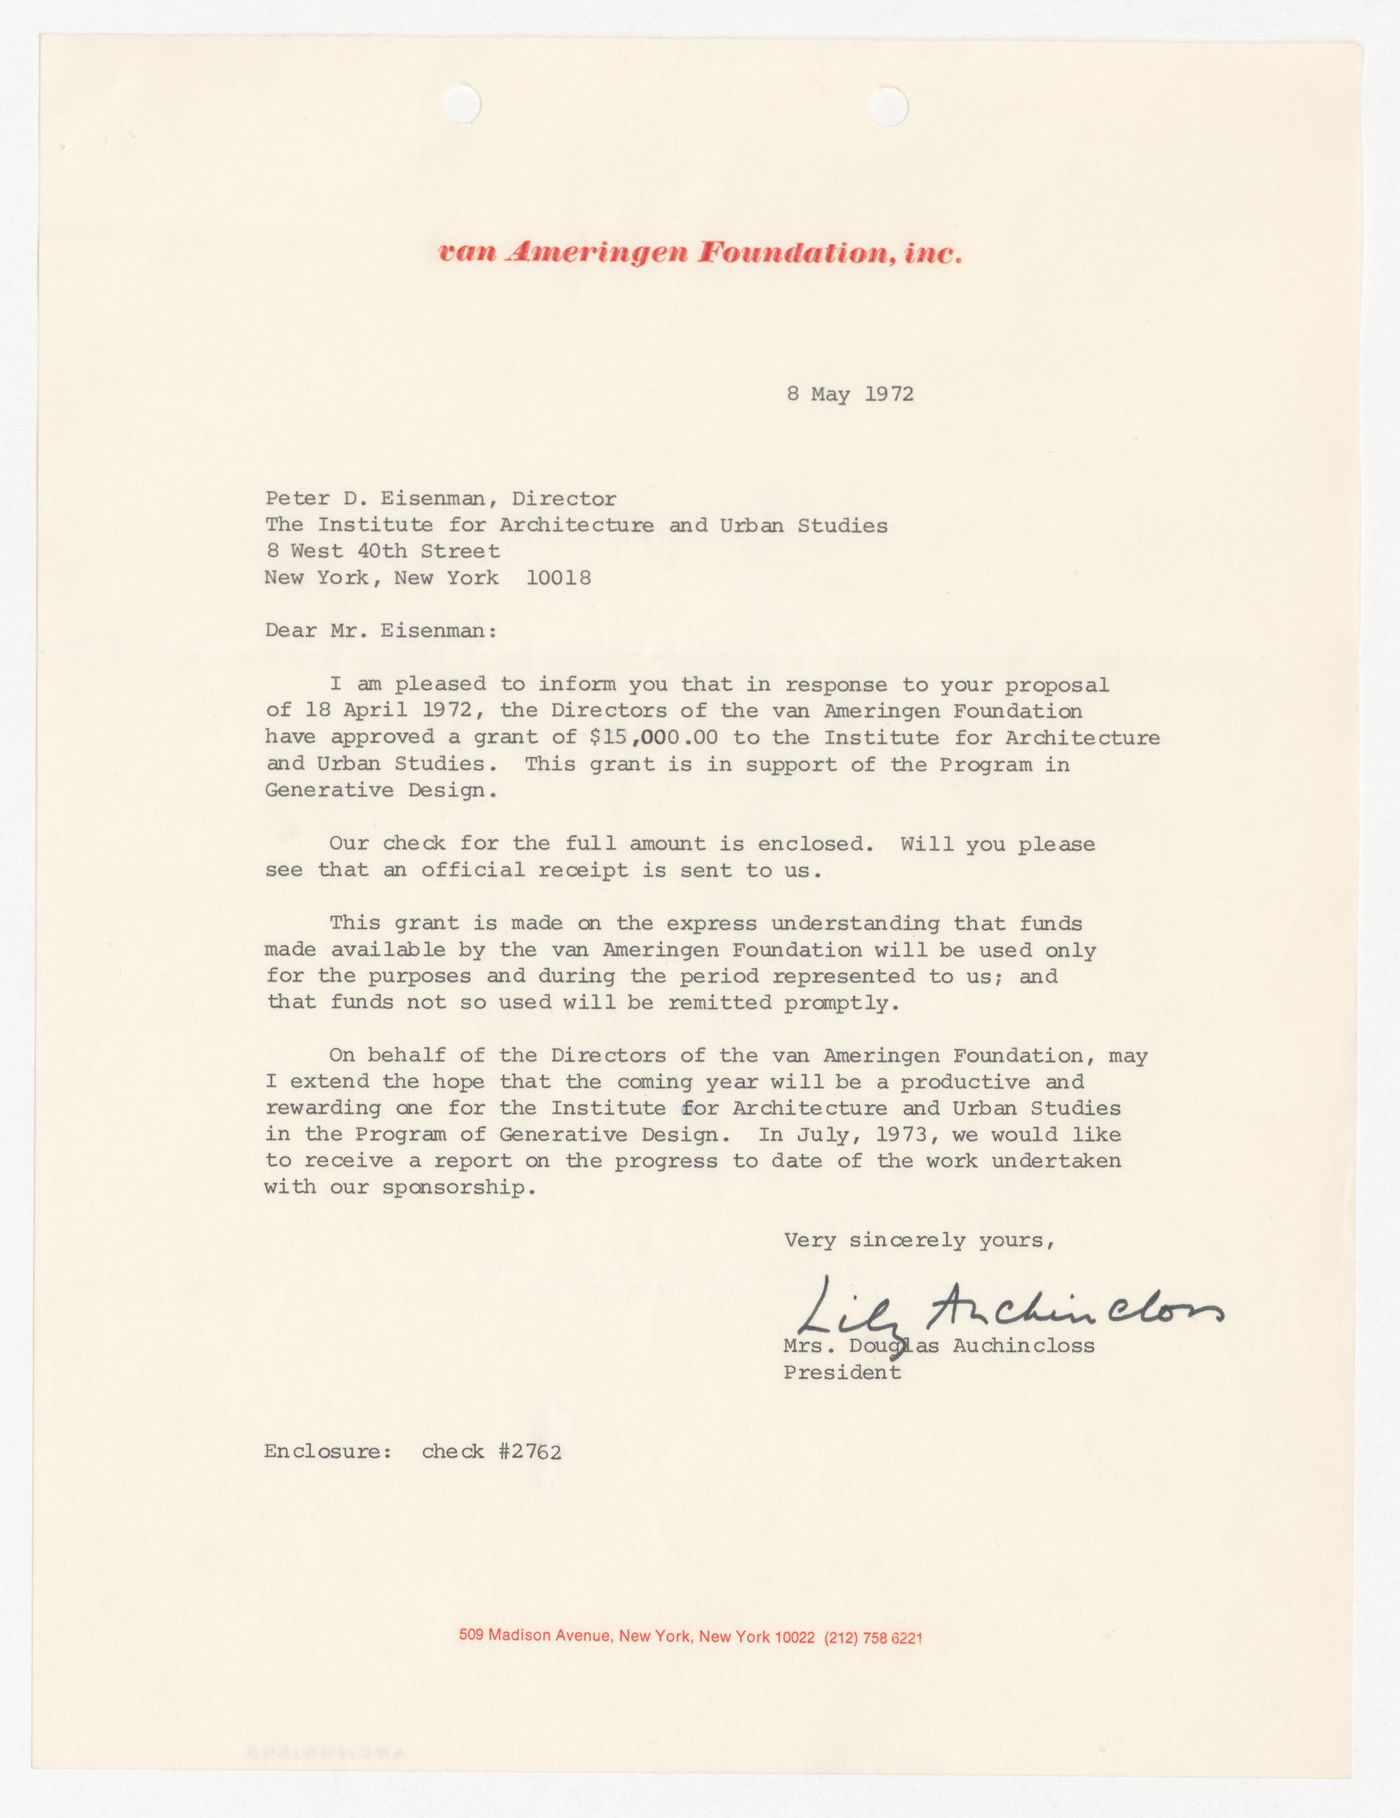 Letter from Mrs. Douglas Auchincloss to Peter D. Eisenman about grant awarded by the van Ameringen Foundation